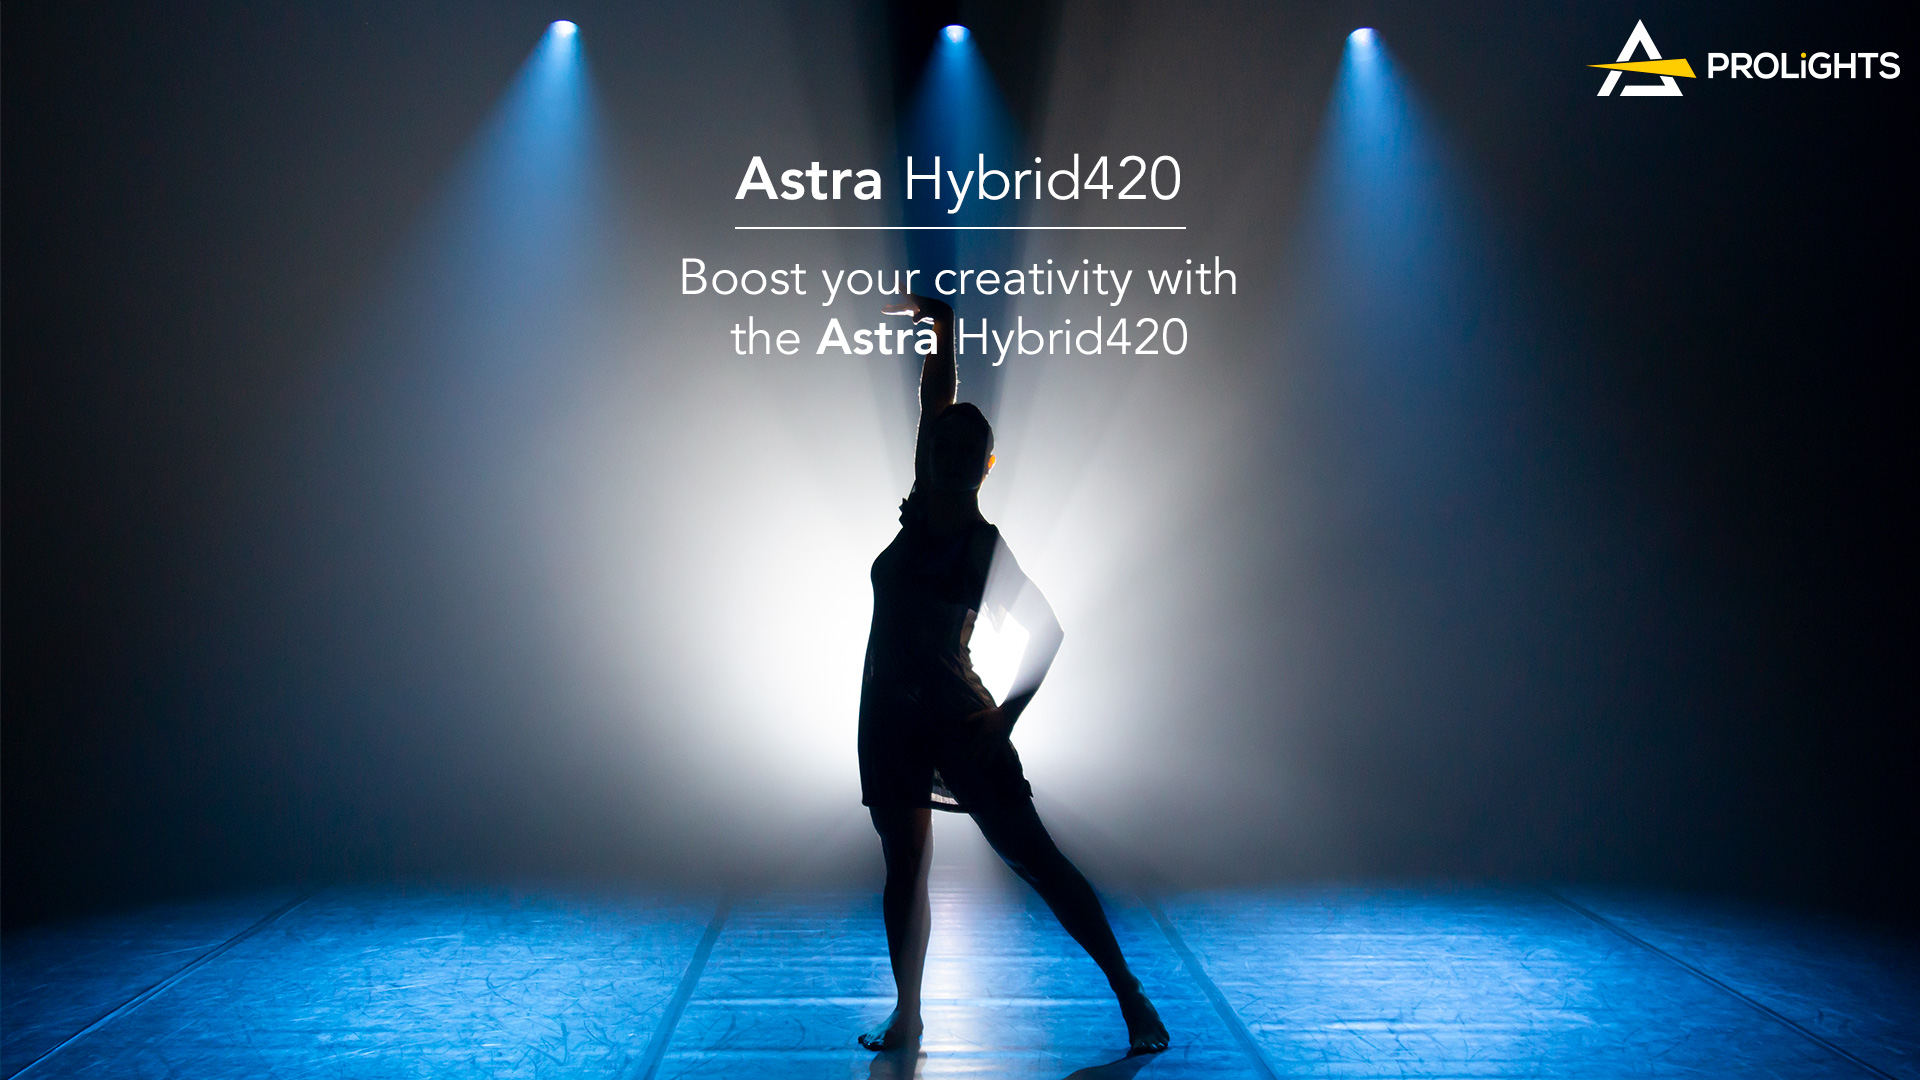 PROLIGHTS launches AstraHybrid420